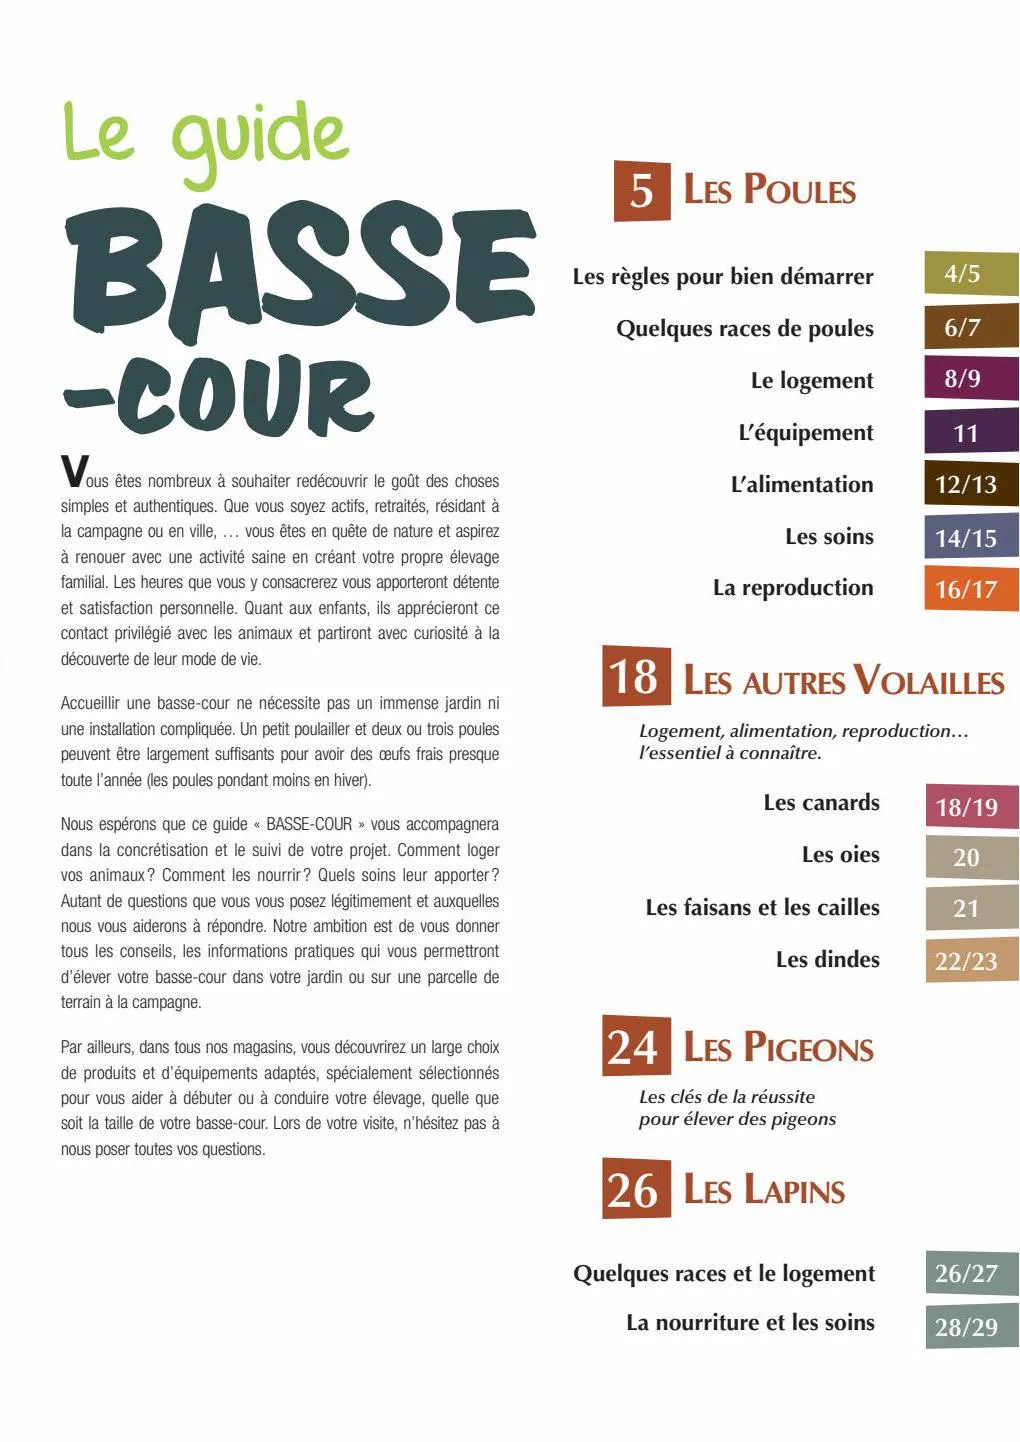 Catalogue Guide basse cour, page 00003